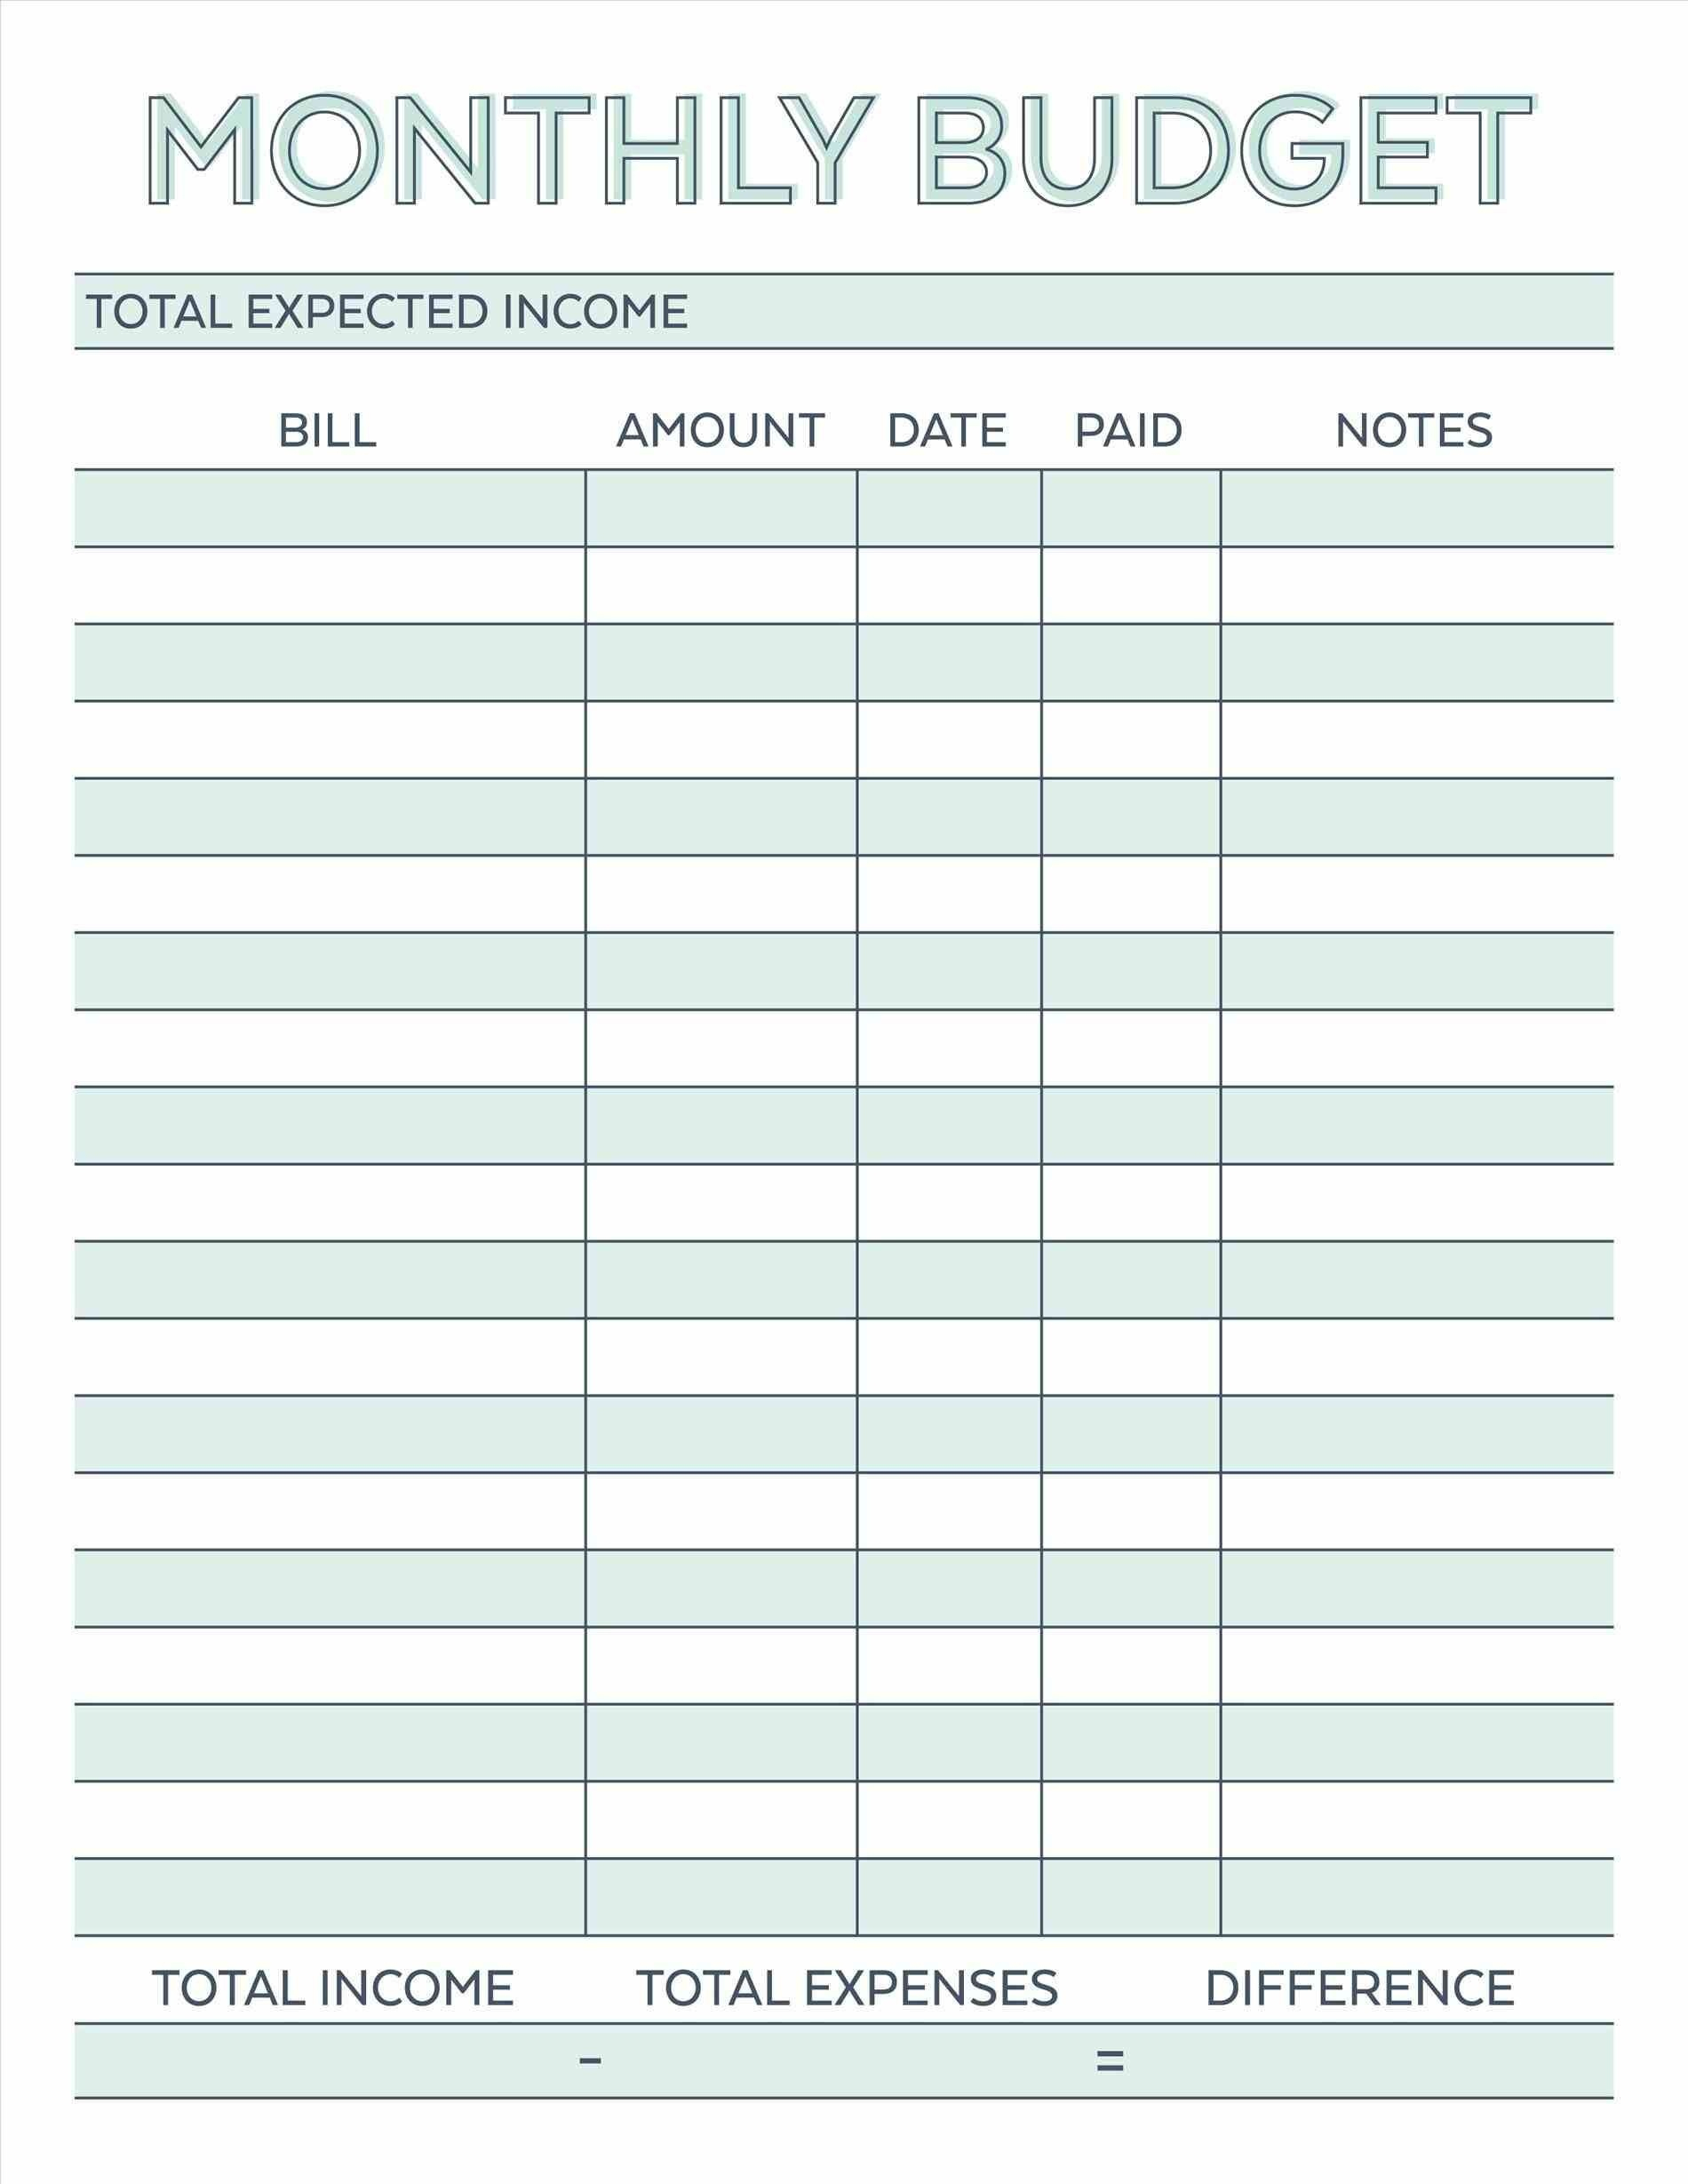 Free Monthly Budget Template - Frugal Fanatic - Household for Awesome Budget Planning Templates